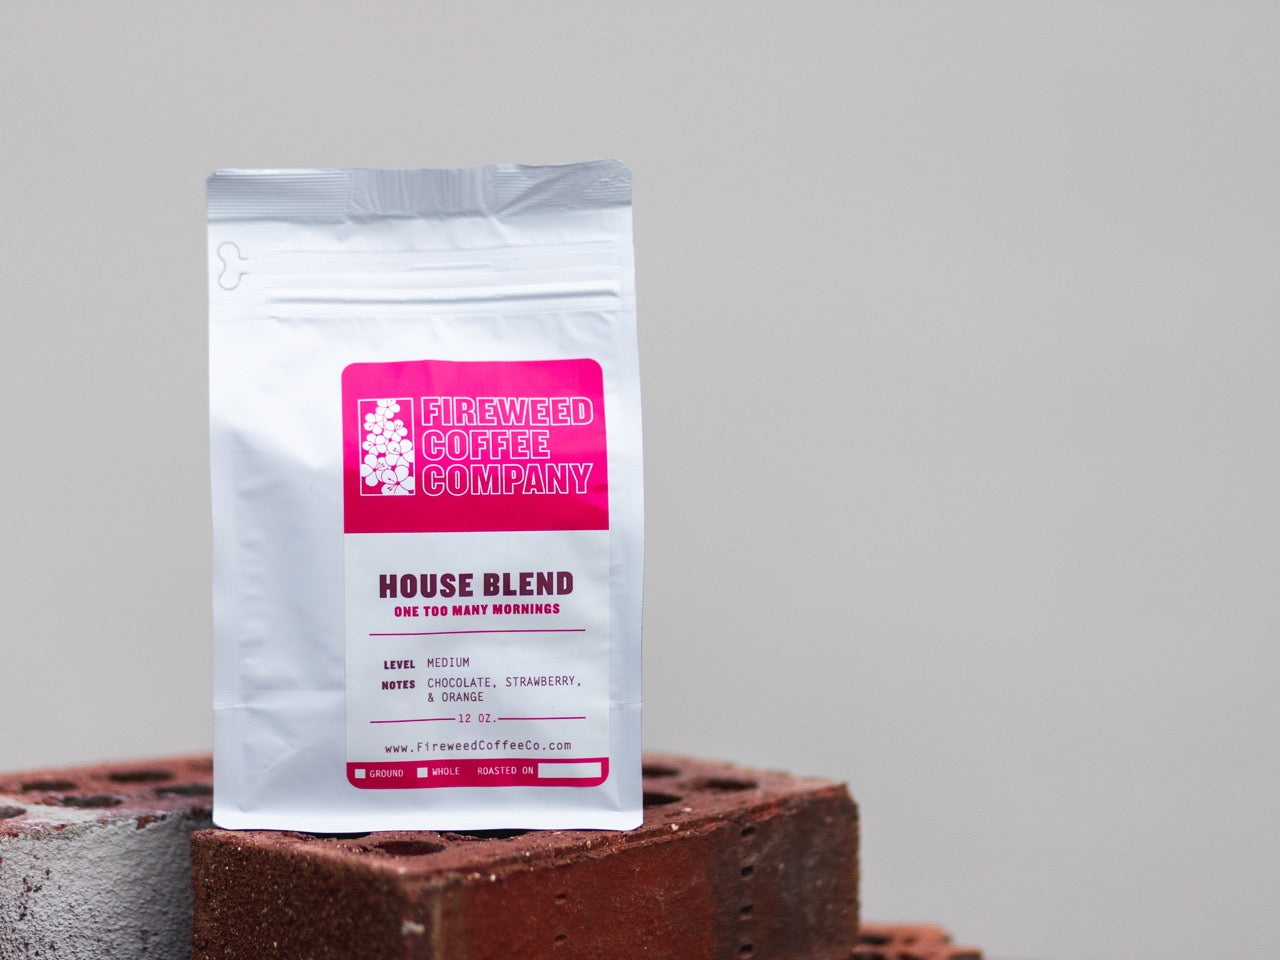 House Blend Coffee - "One Too Many Mornings" from Fireweed Coffee